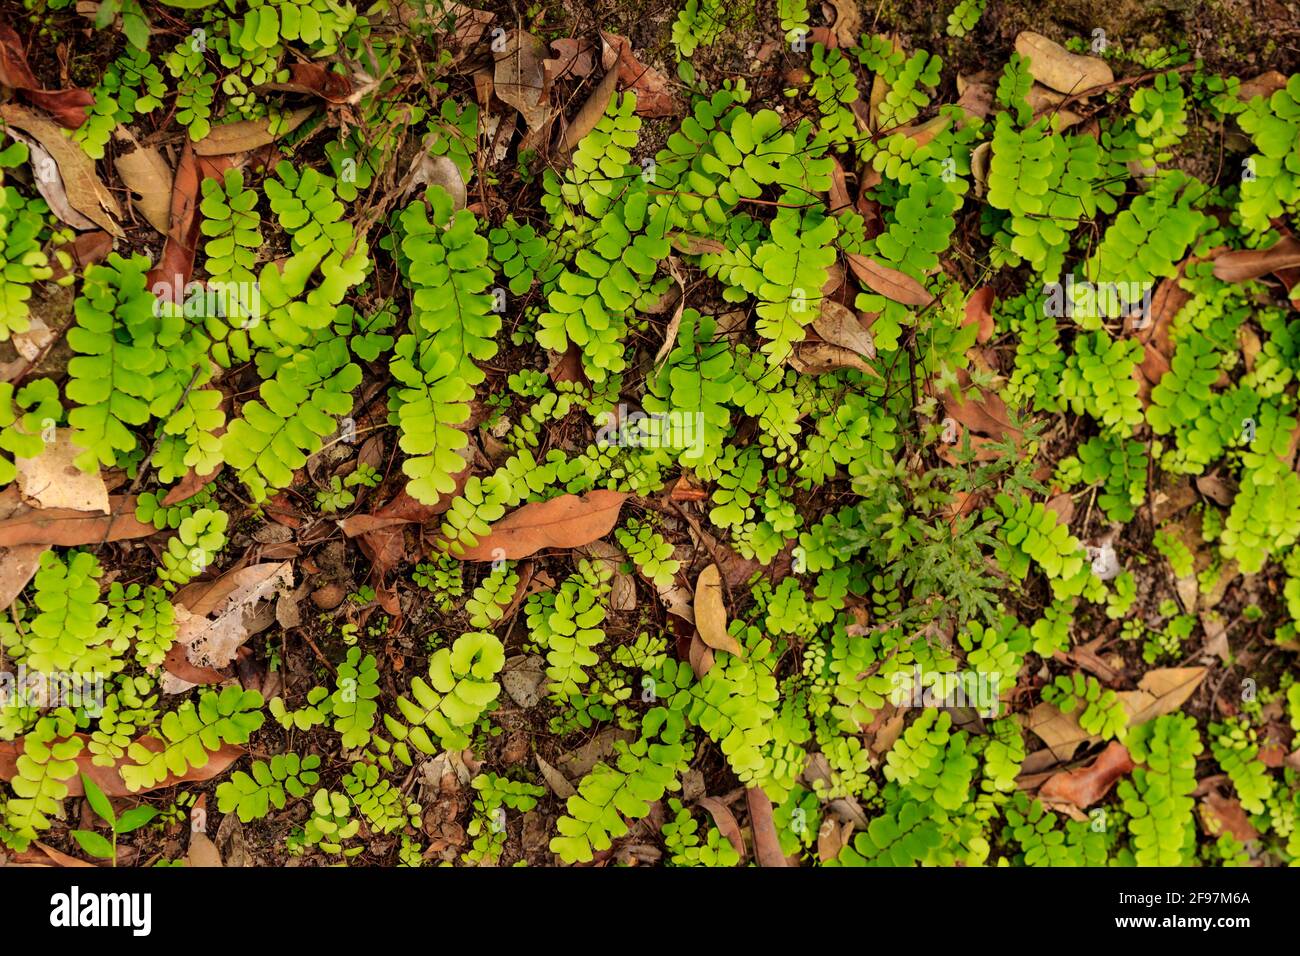 A lot of Adiantum philippense on the ground of rotten leaves. Stock Photo